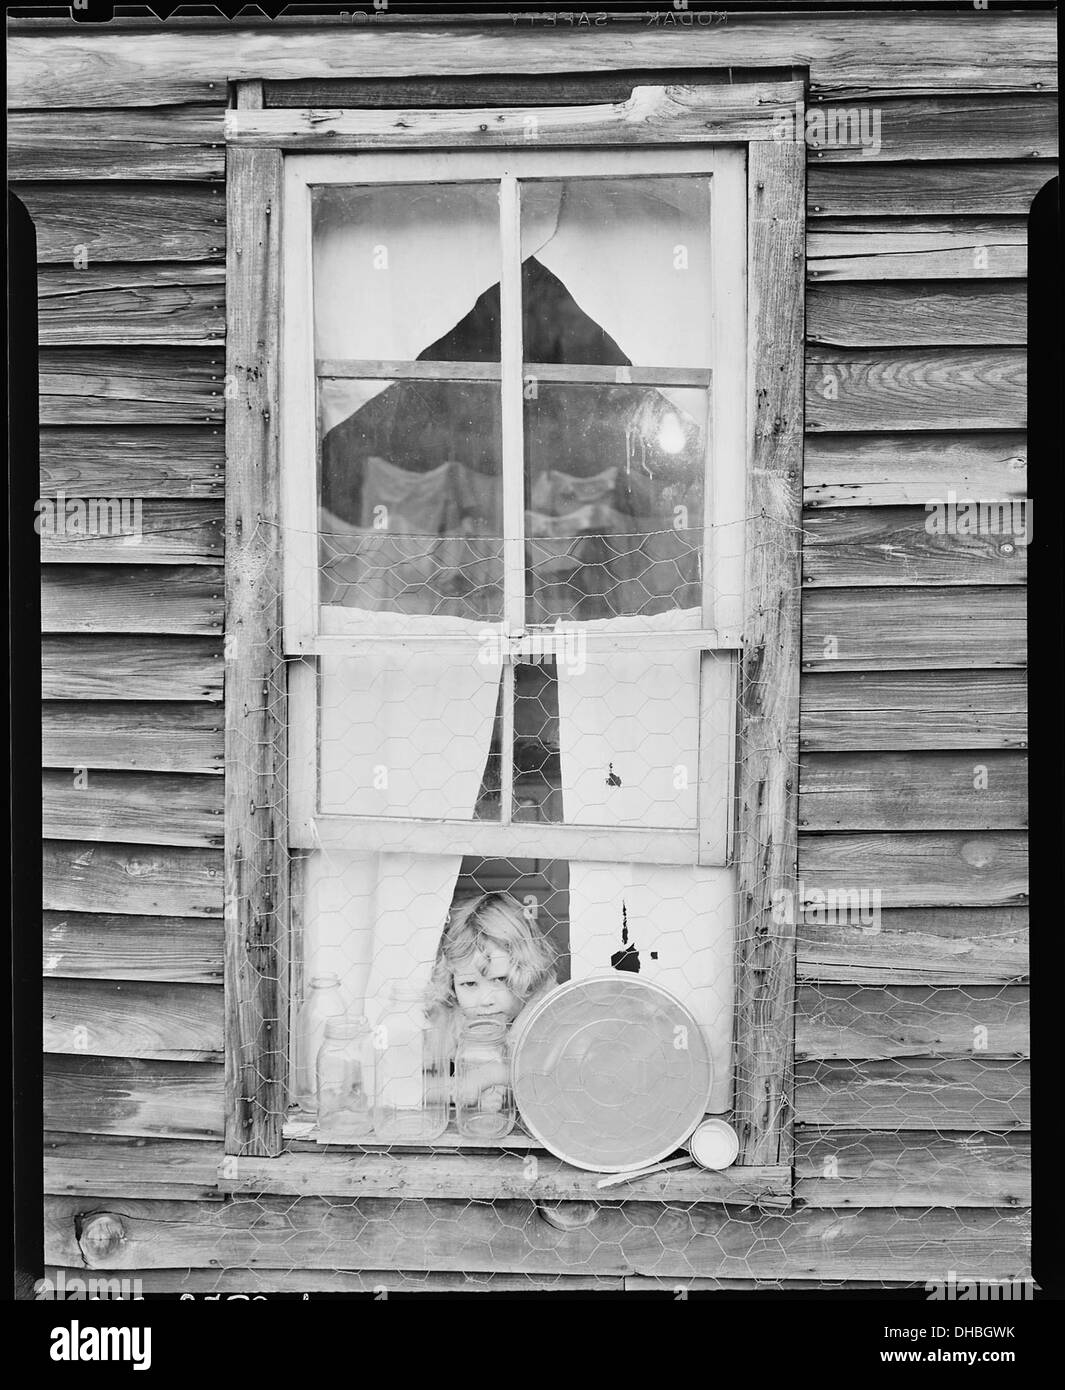 Bobbie Jean Sergent looking out the kitchen window. P V & K Coal Company, Clover Gap Mine, Lejunior, Harlan County... 541370 Stock Photo